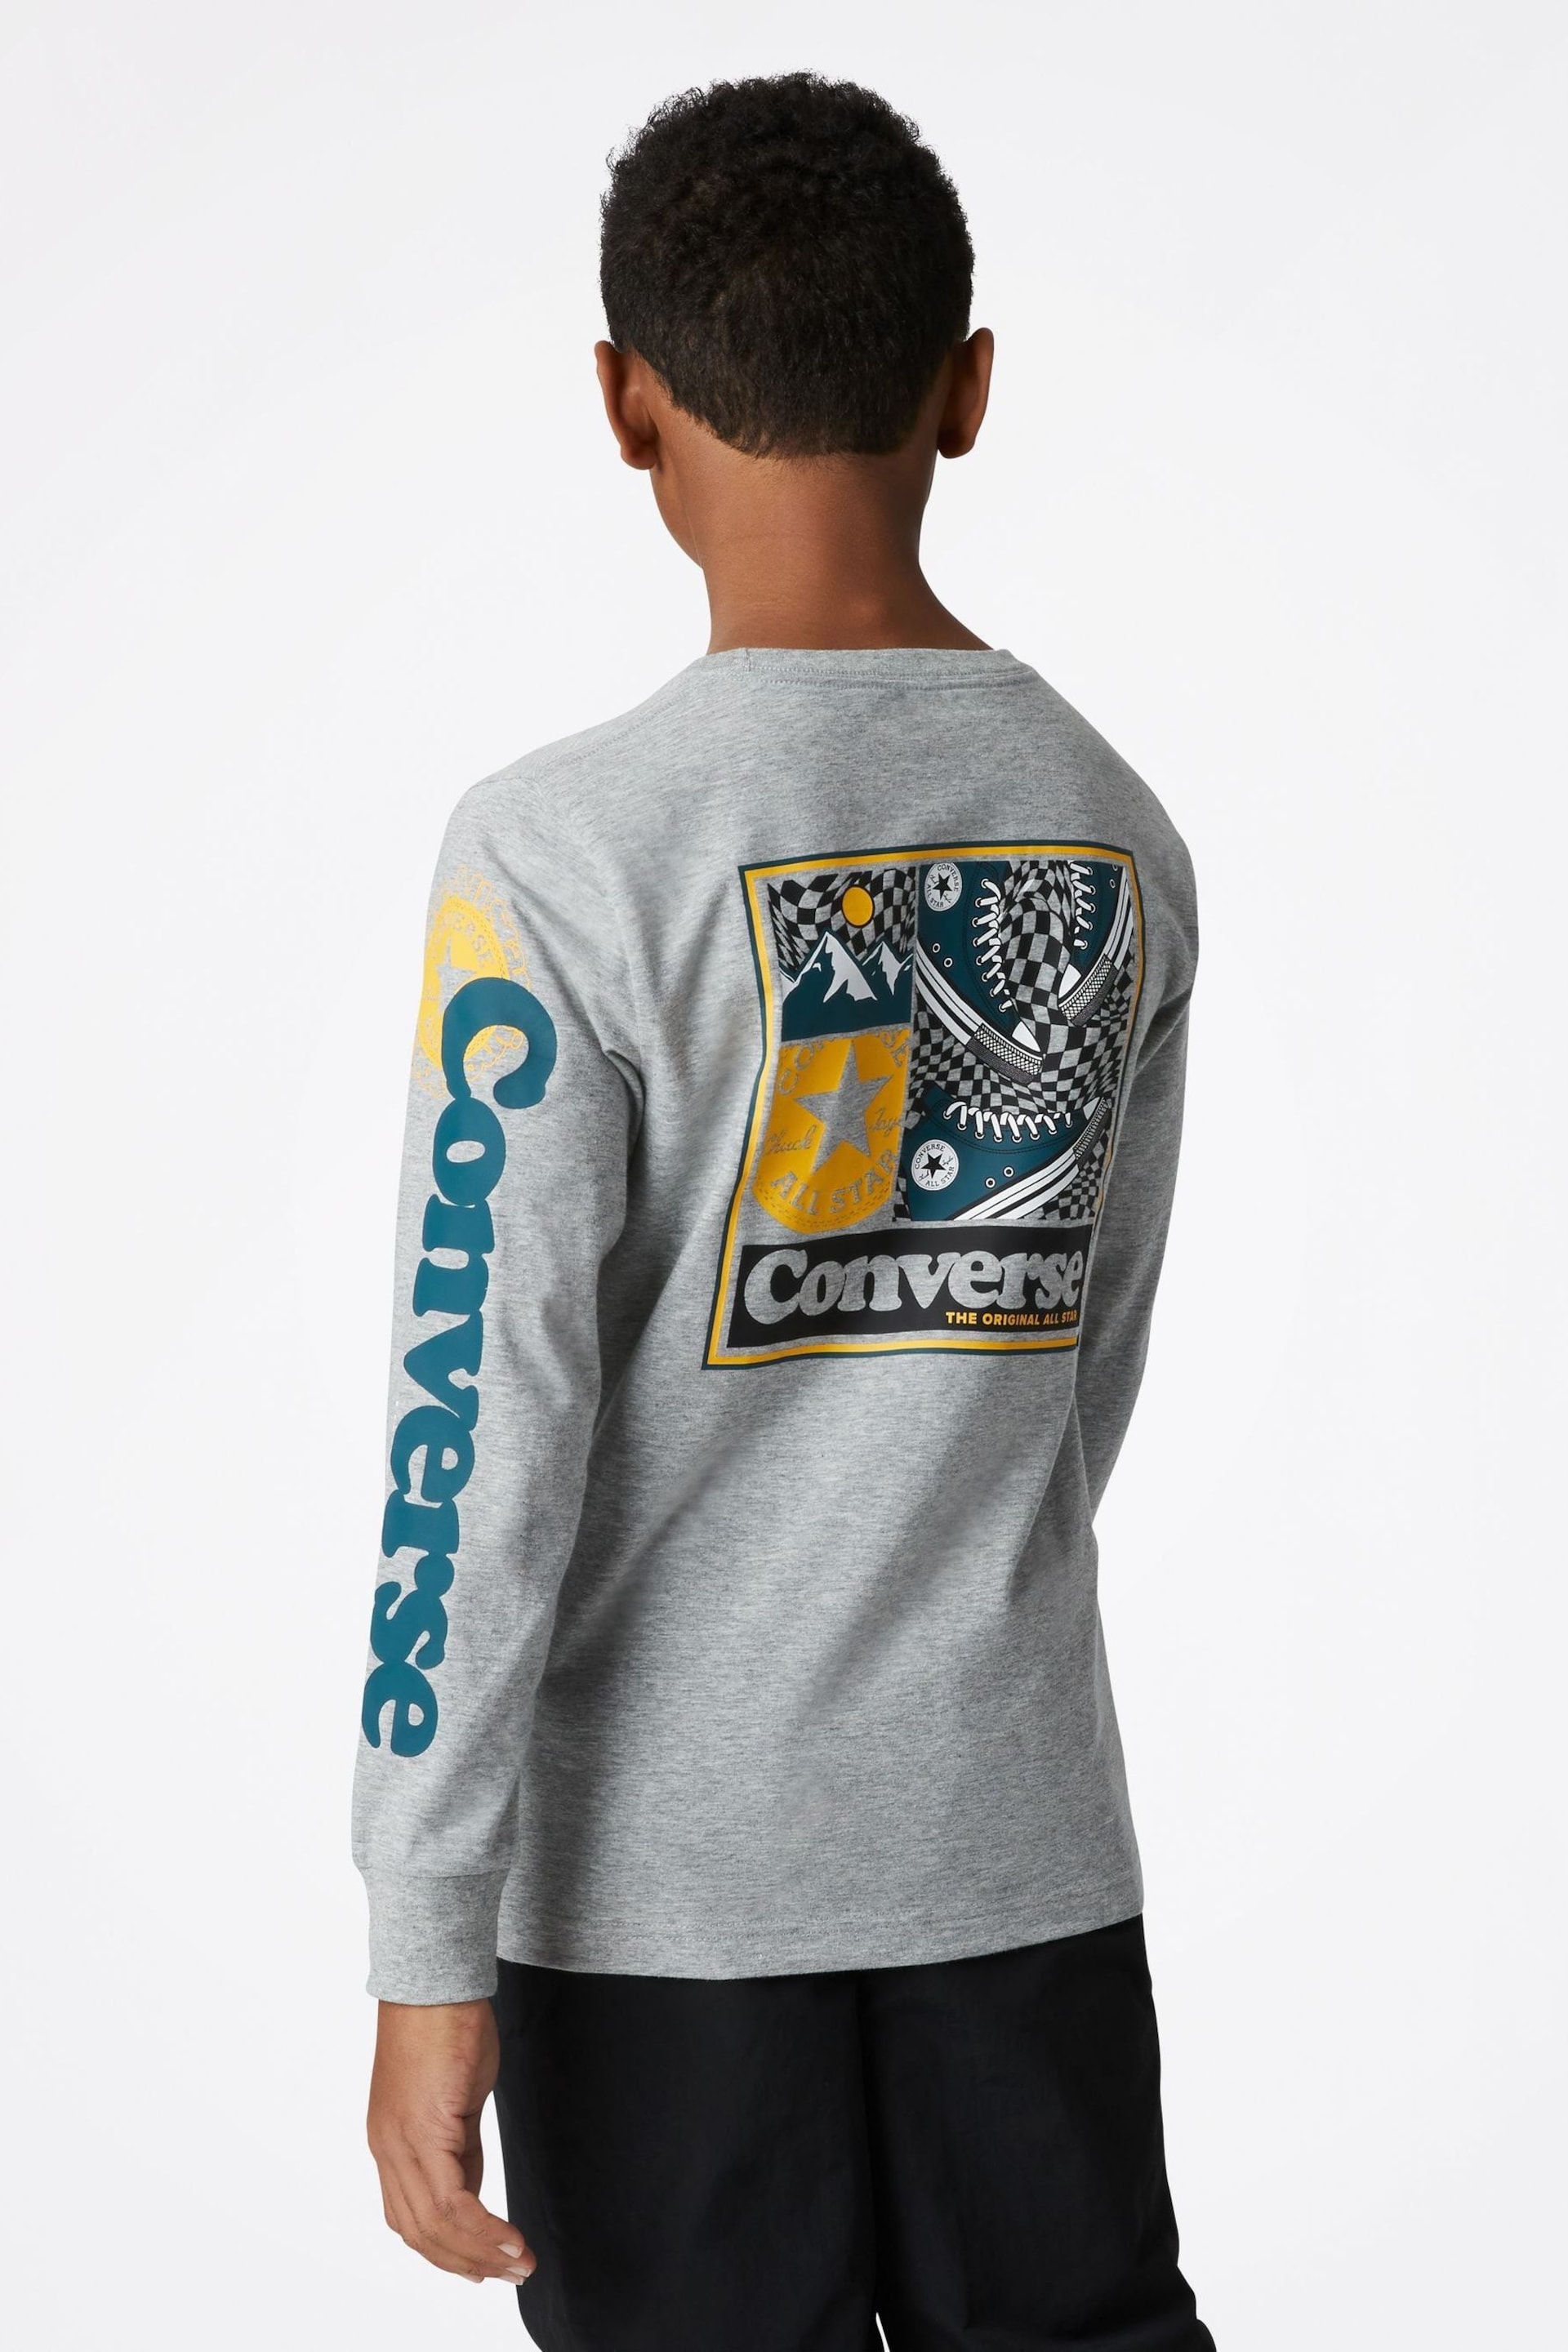 Converse Grey Graphic Little Kids Long Sleeve T-Shirt - Image 2 of 9